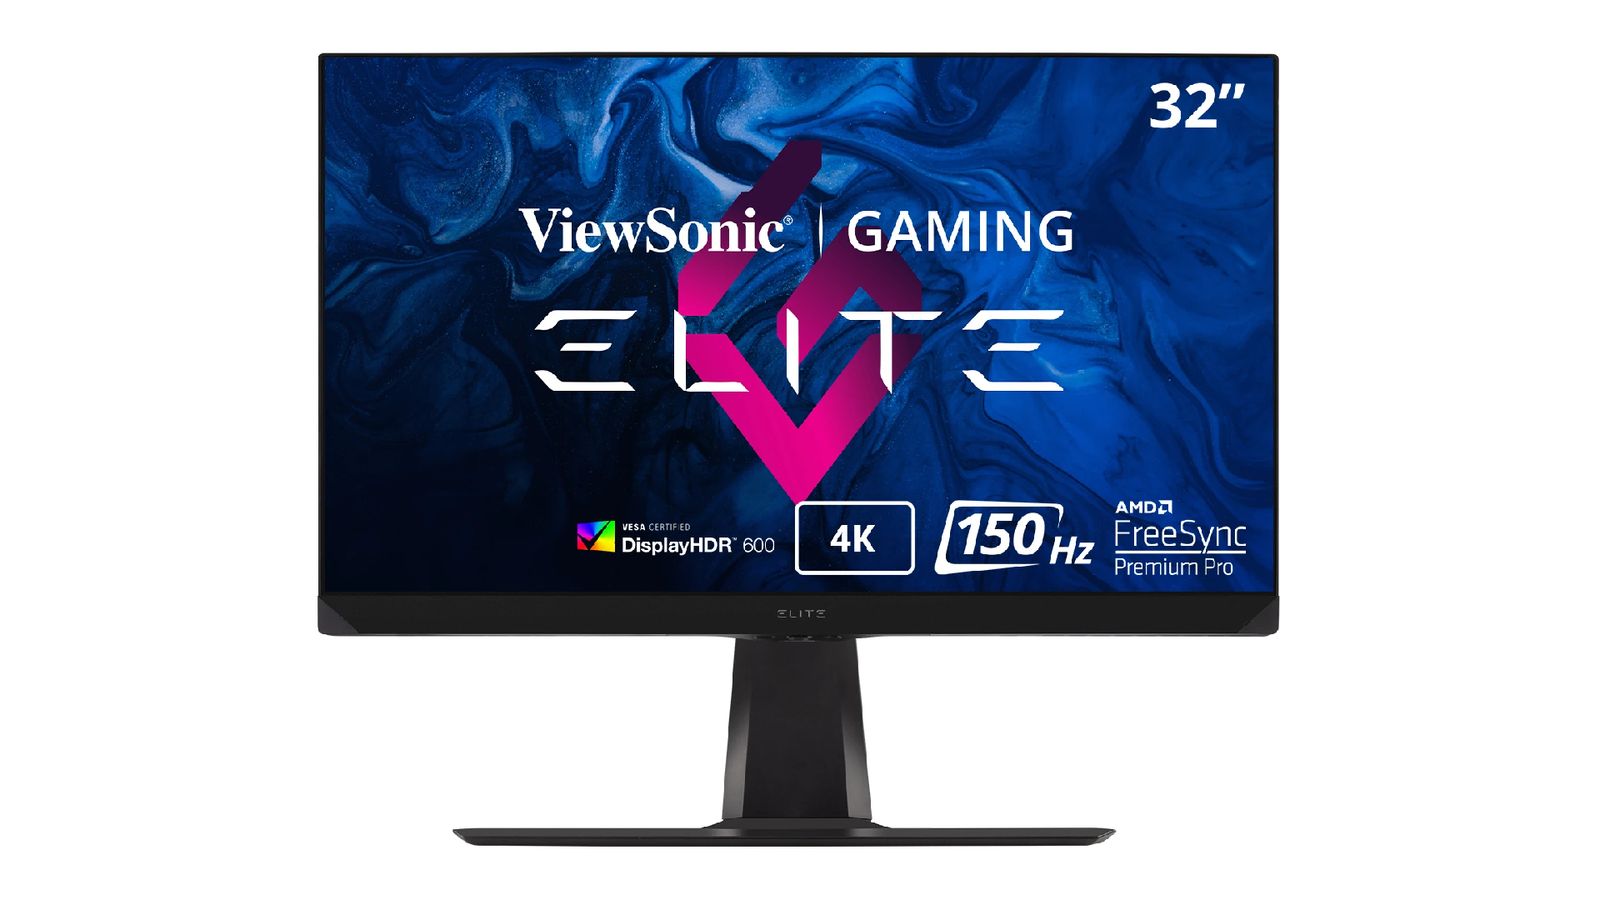 ViewSonic ELITE XG320U product image of a black monitor featuring white ViewSonic branding in front of a pink logo on a blue background on the display.